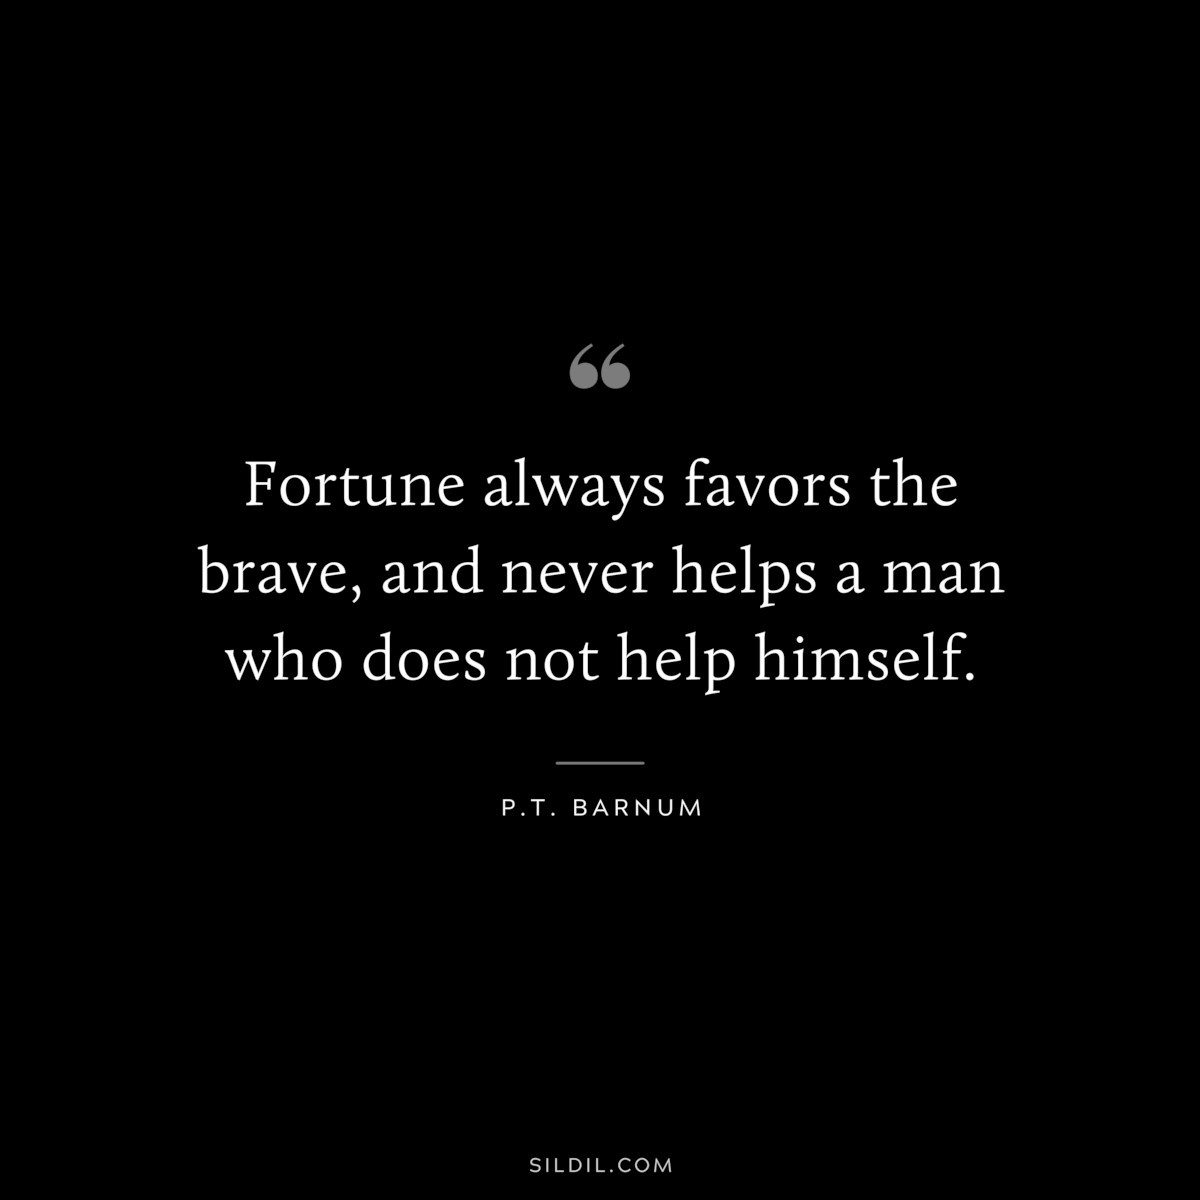 Fortune always favors the brave, and never helps a man who does not help himself. ― P.T. Barnum